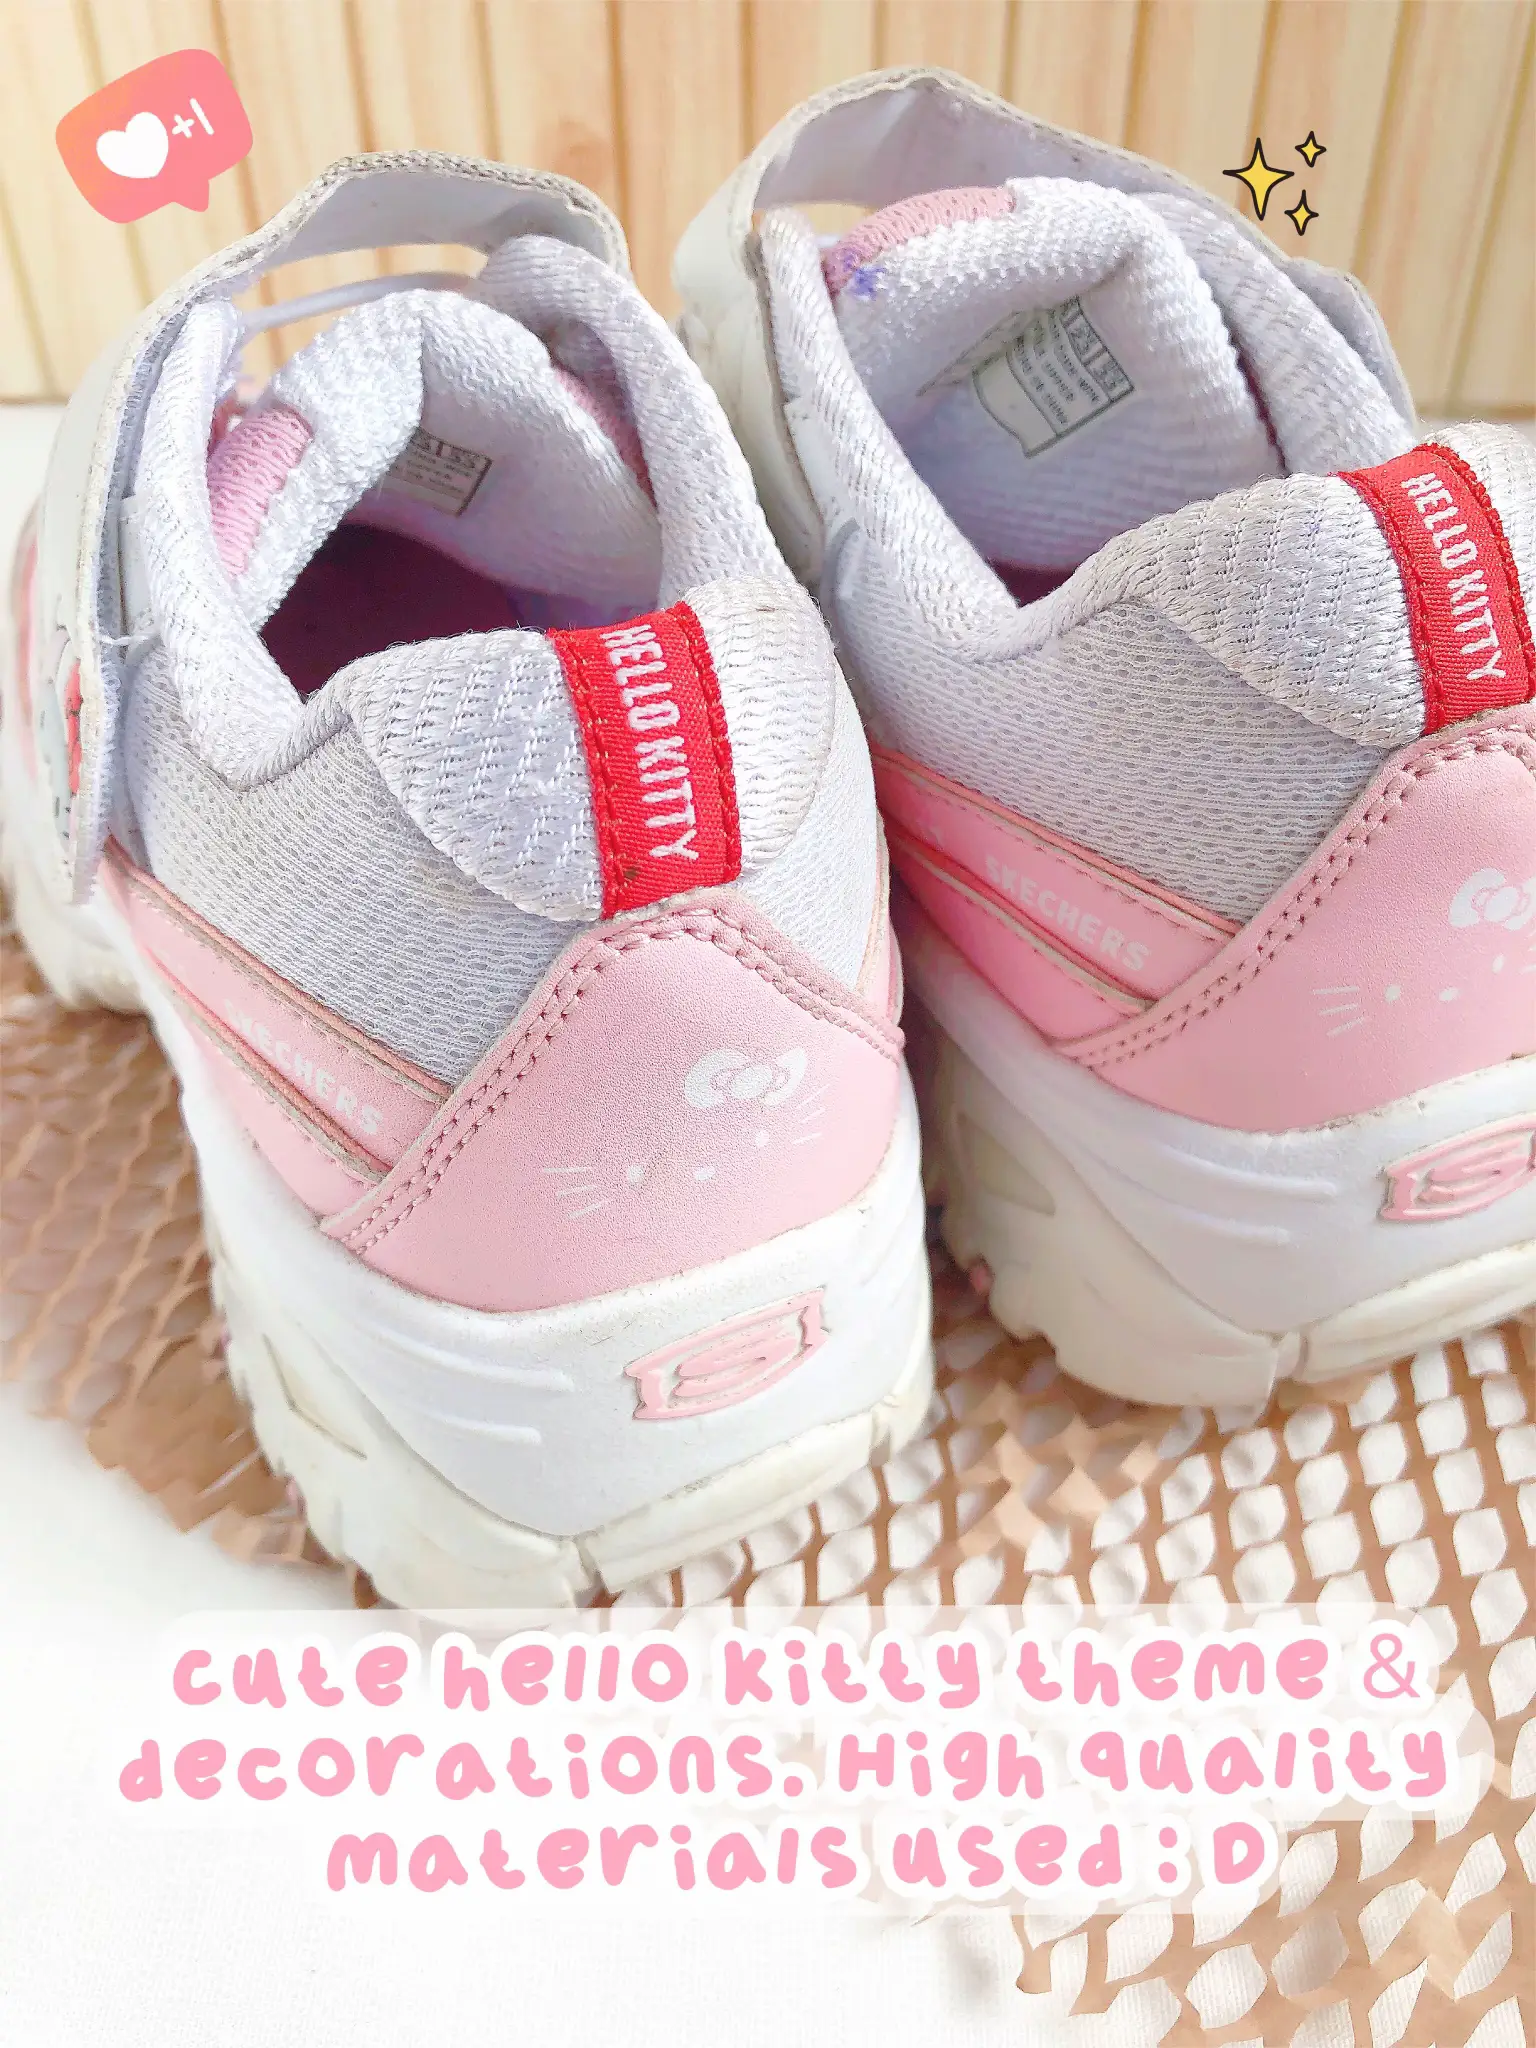 Skechers x Hello Kitty Collaborate on Sneakers